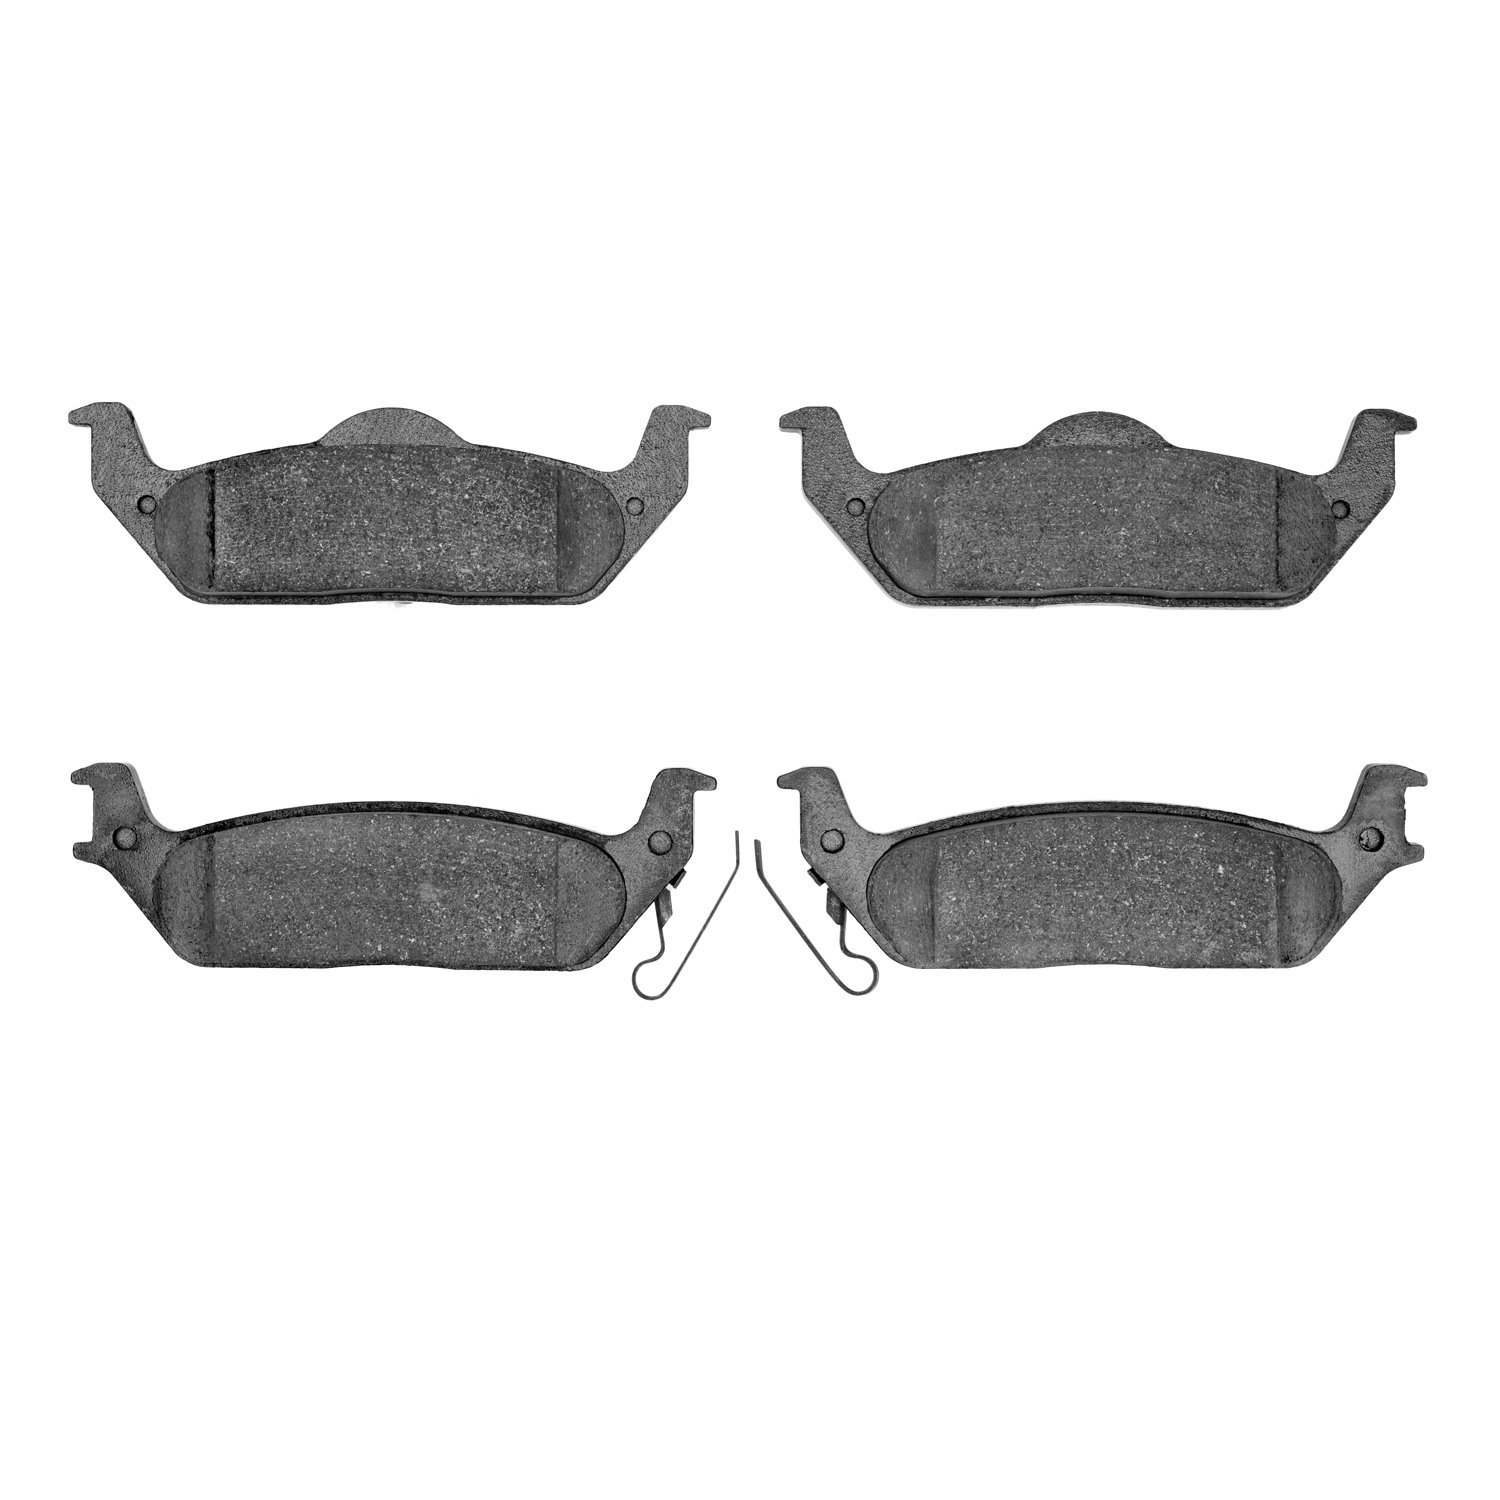 1400-1012-00 Ultimate-Duty Brake Pads Kit, 2004-2011 Ford/Lincoln/Mercury/Mazda, Position: Rear